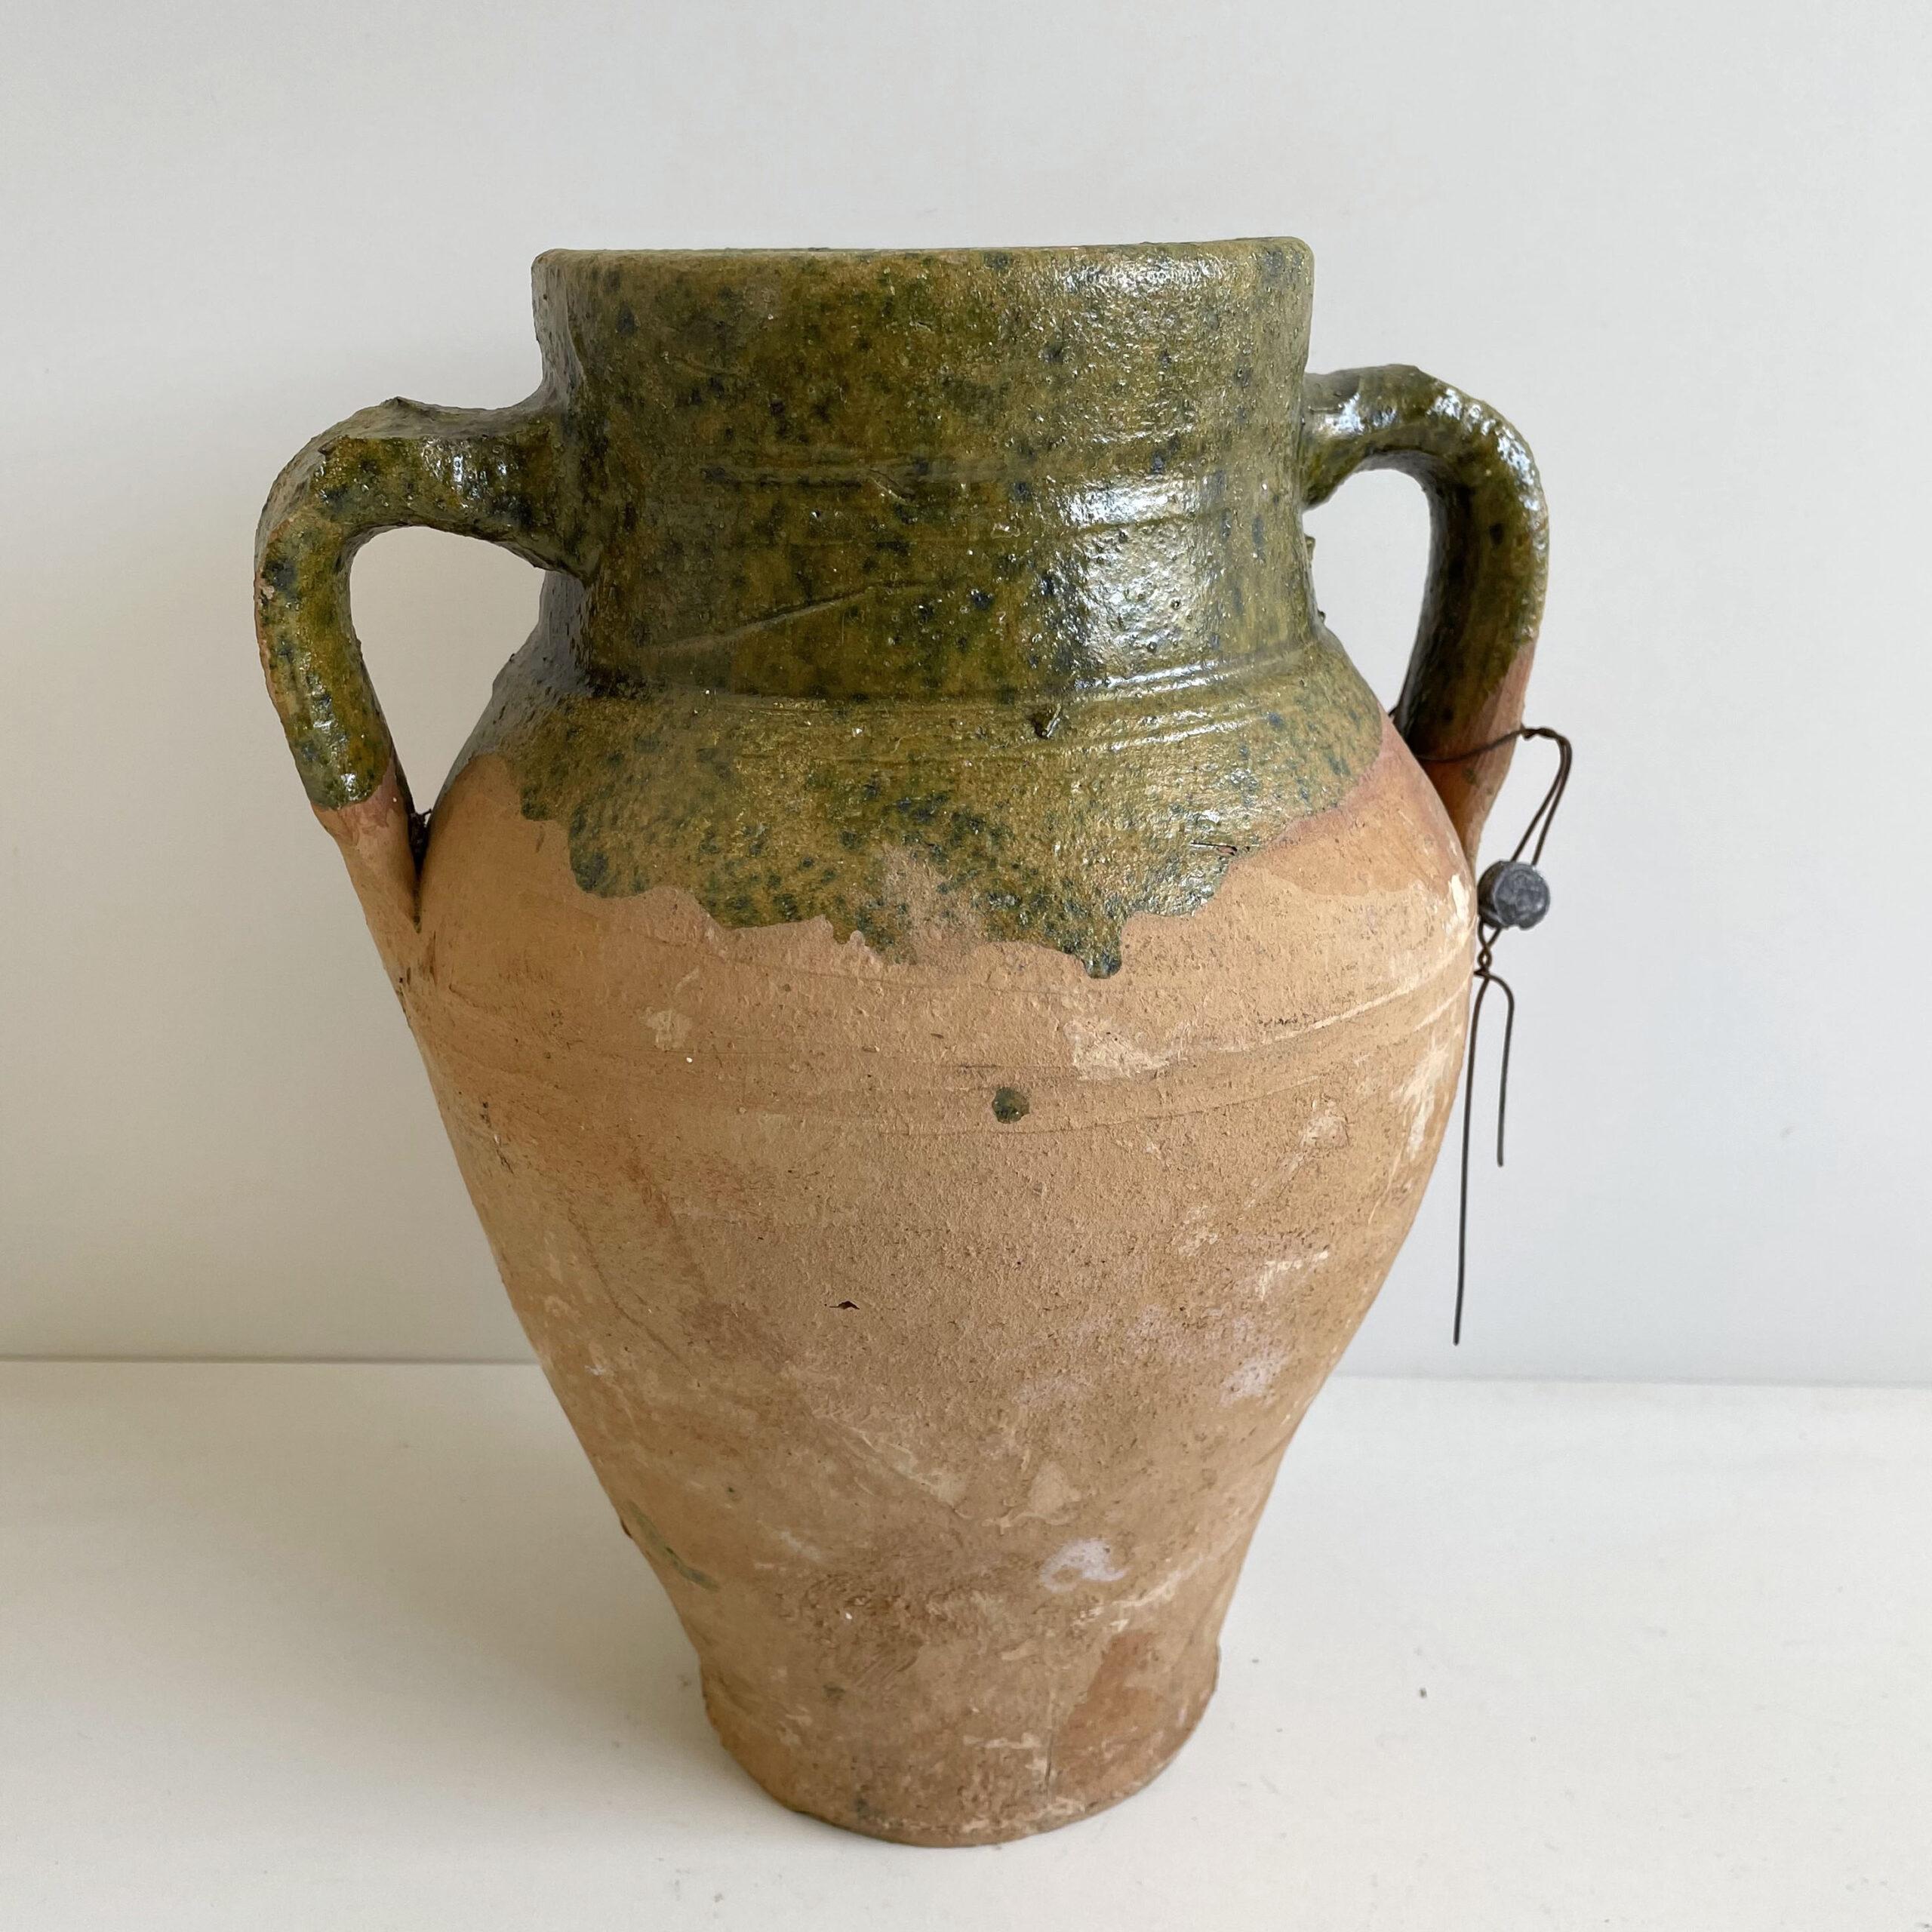 Beautiful clay pottery with dark olive green dripping glaze.
Imported.
Measures: 11” H x 9”W x 7”D